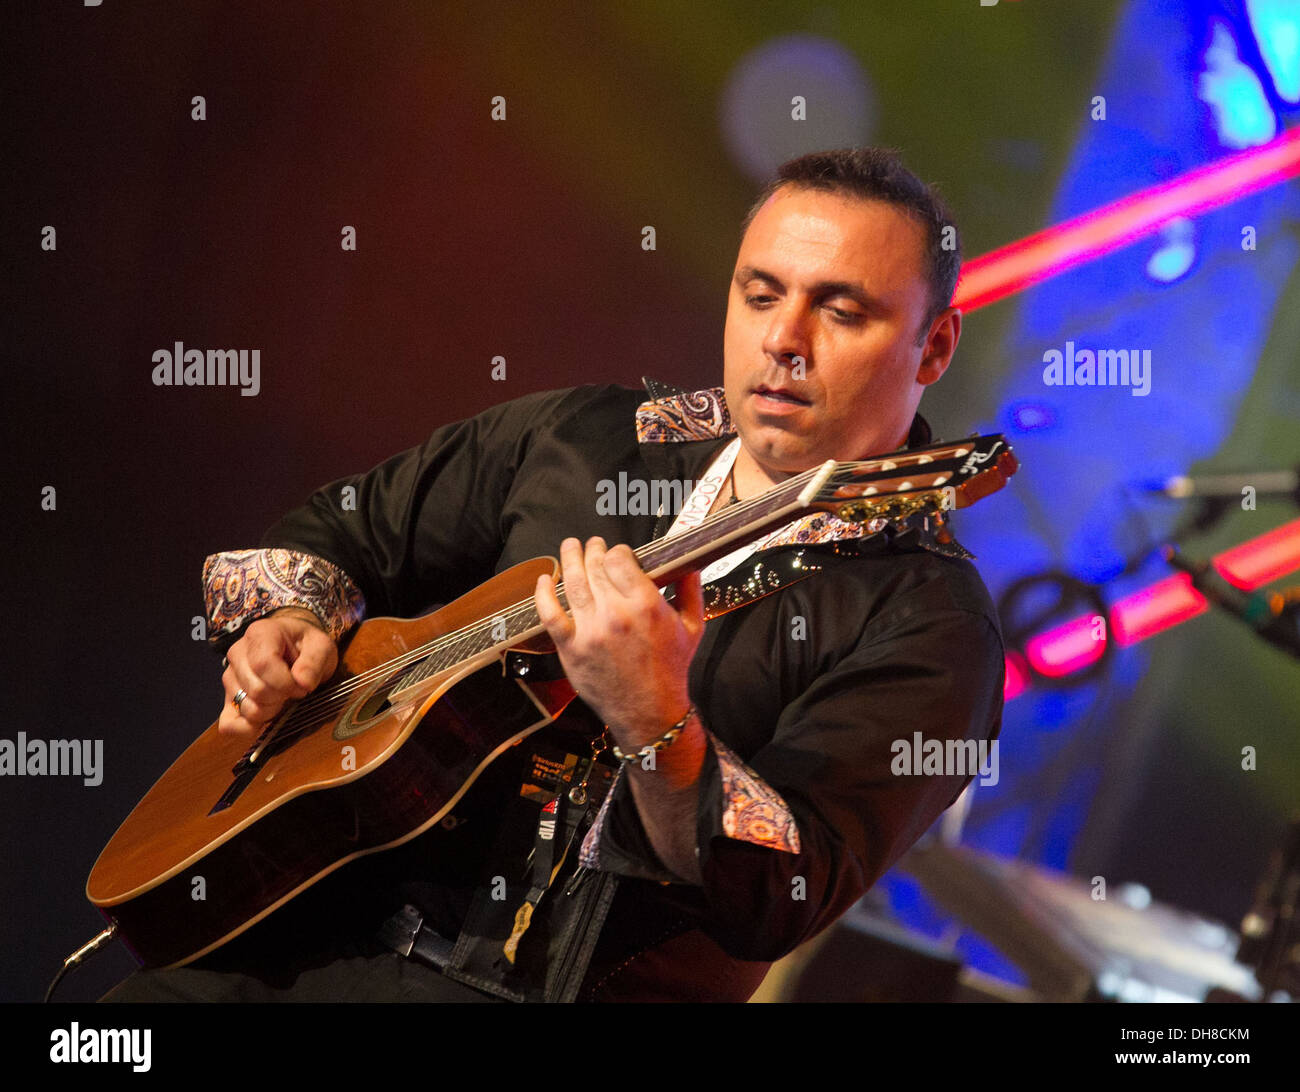 Pavlo performs on stage at 12th Annual Indies Awards during 2012 Slacker Canadian Music Week Toronto Canada - 24.03.12 Stock Photo